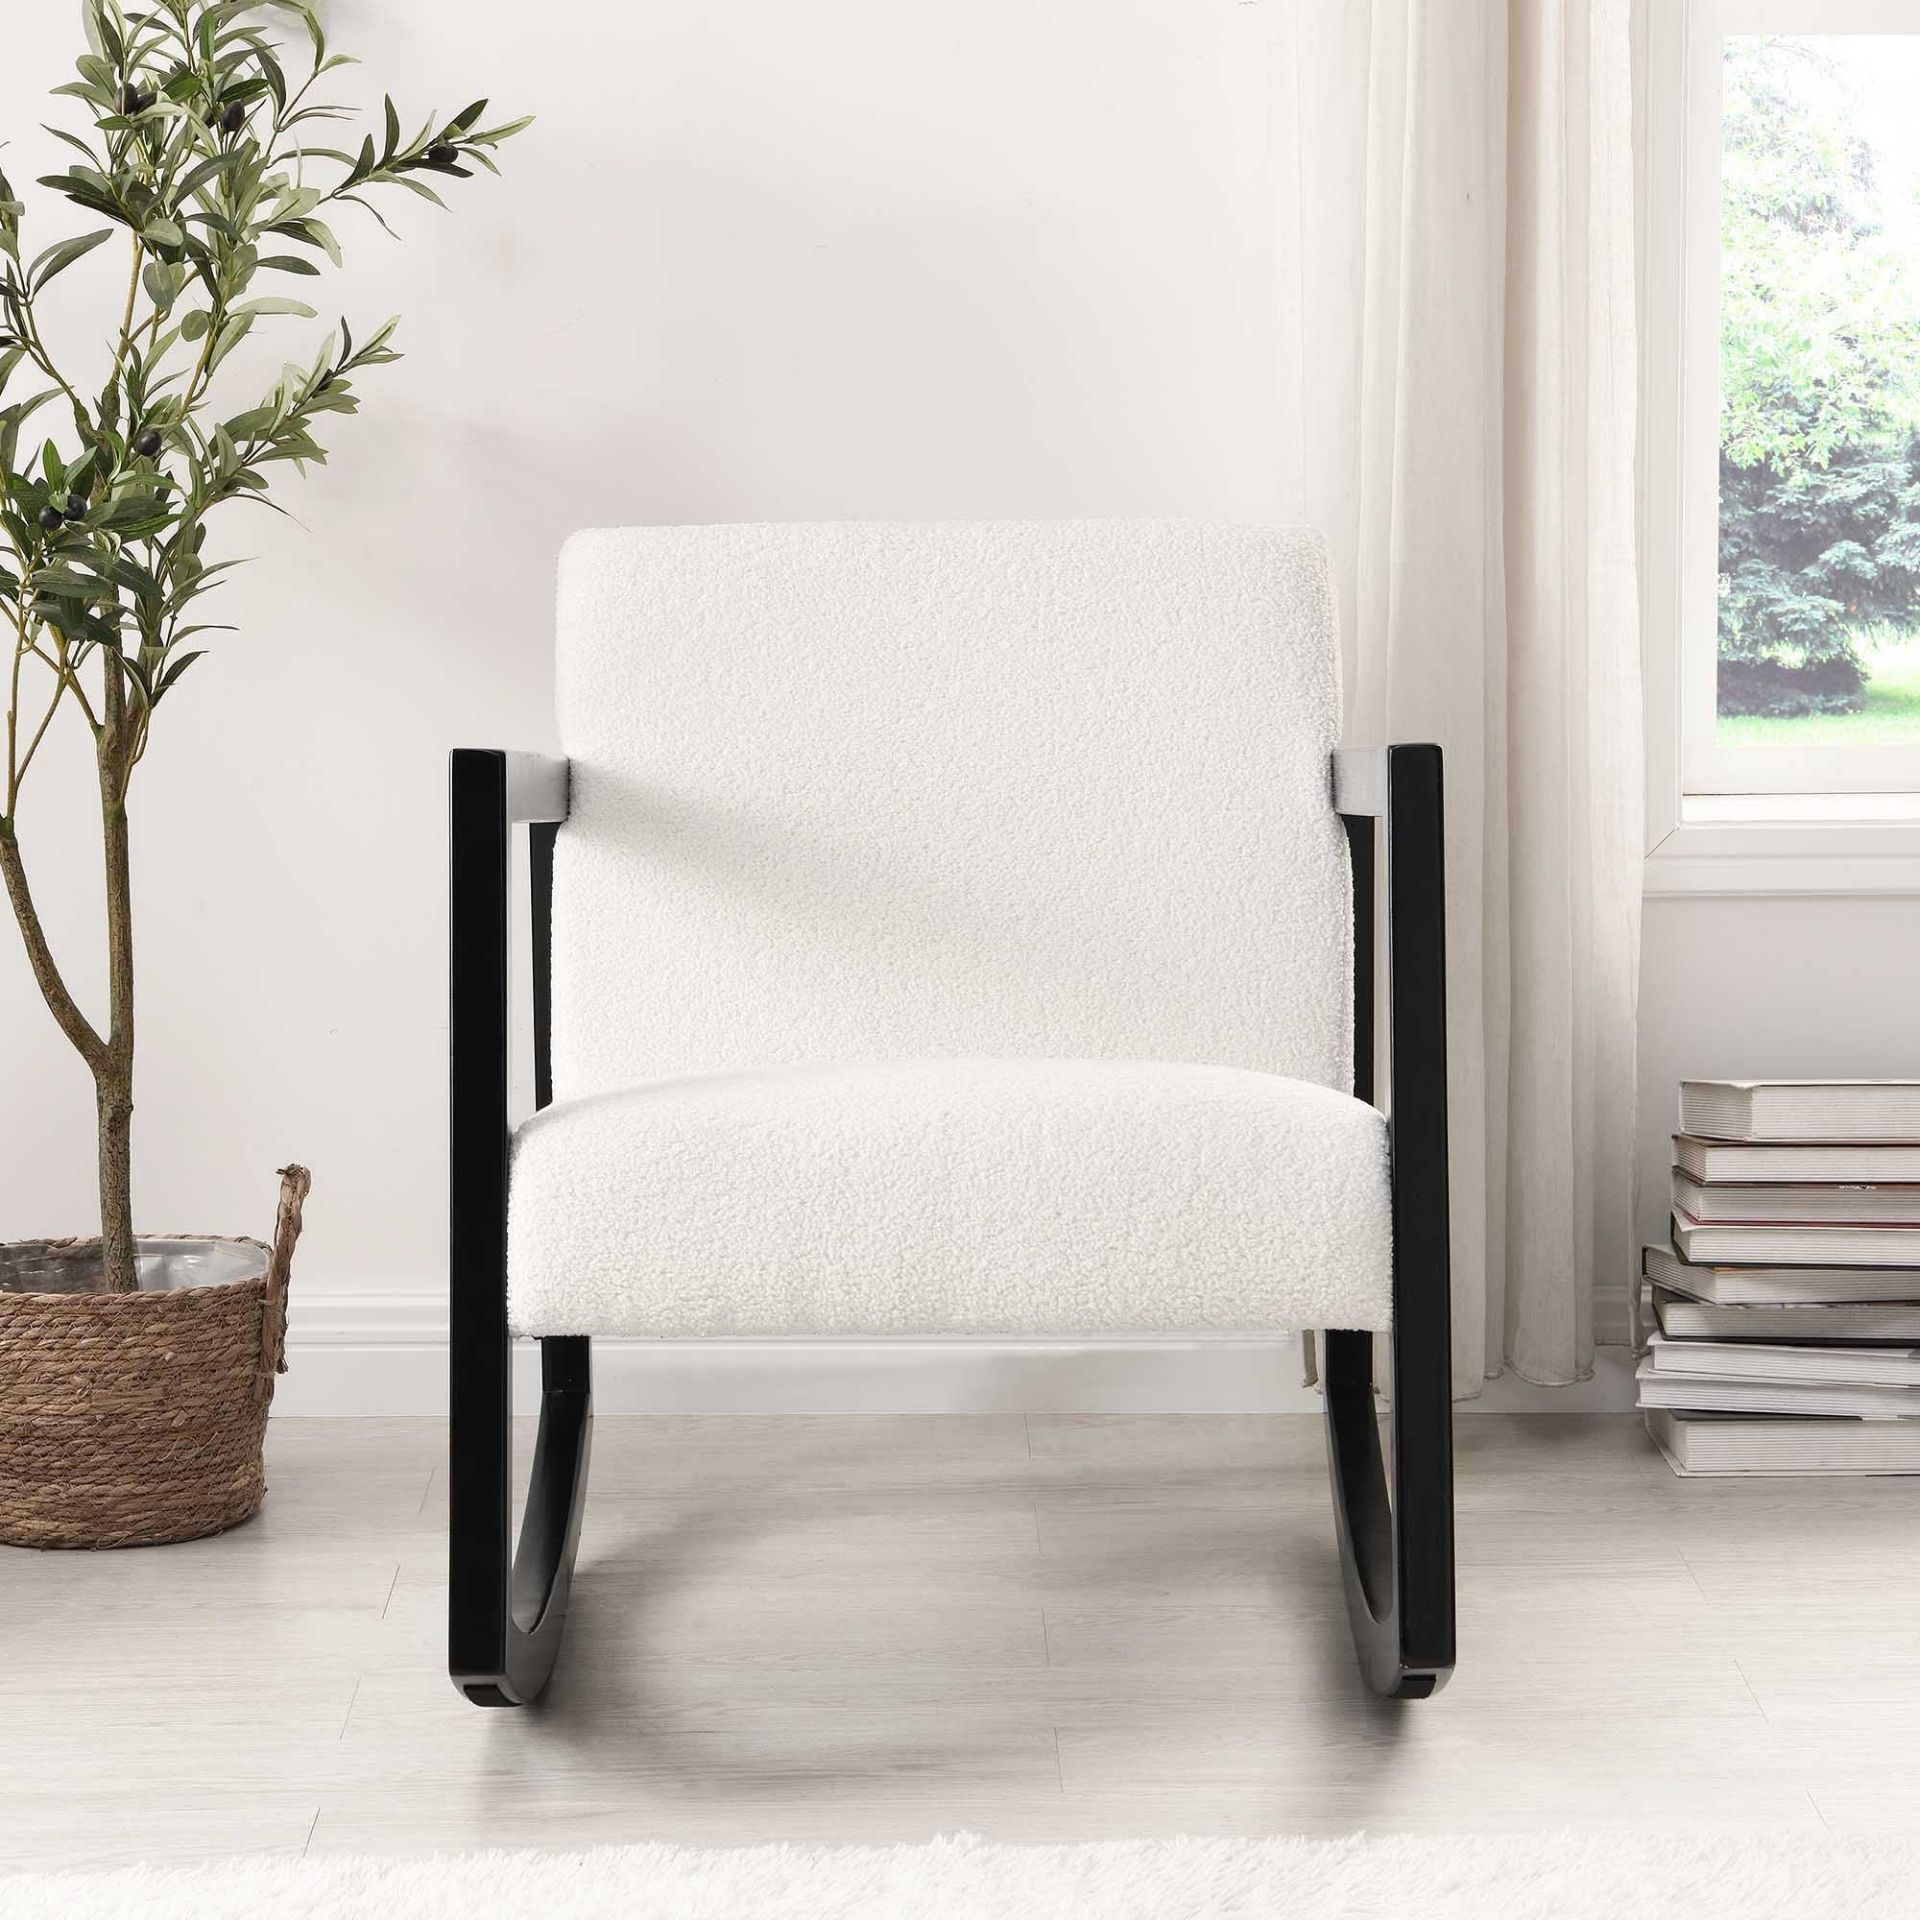 Fyne Ecru Boucle Rocking Armchair, Black Frame. - R14. RRP £239.99. Inspired by traditional